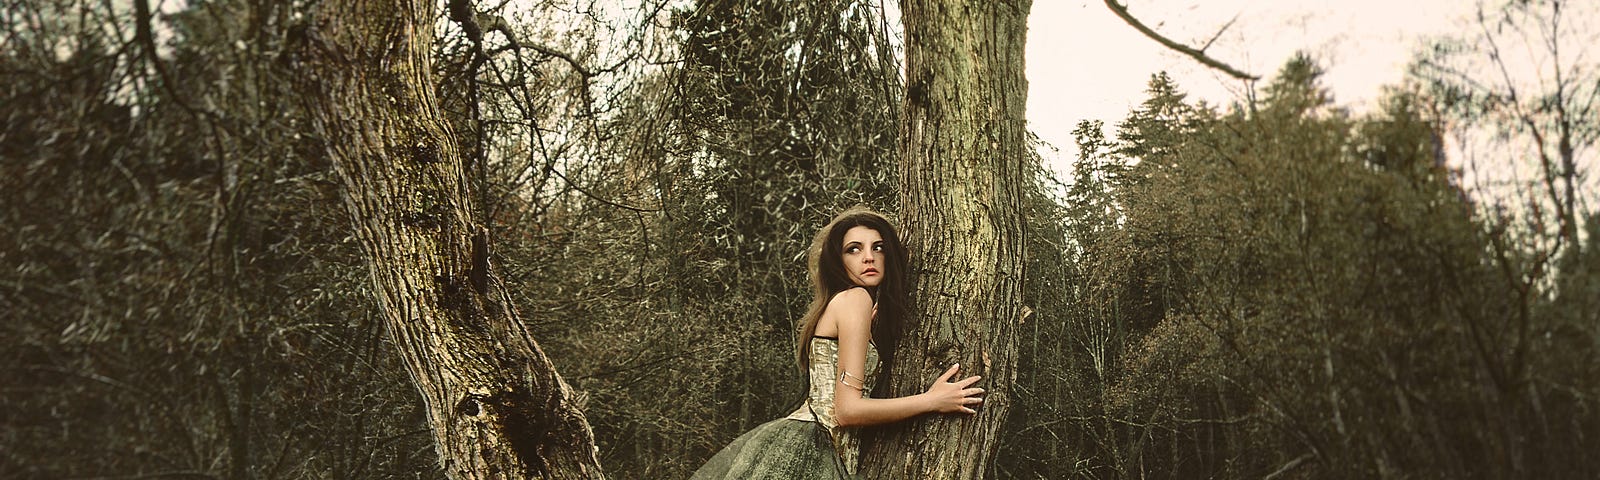 A photo of a woman hugging a tree with a long flowing green gown on with a distressed expression on her face.